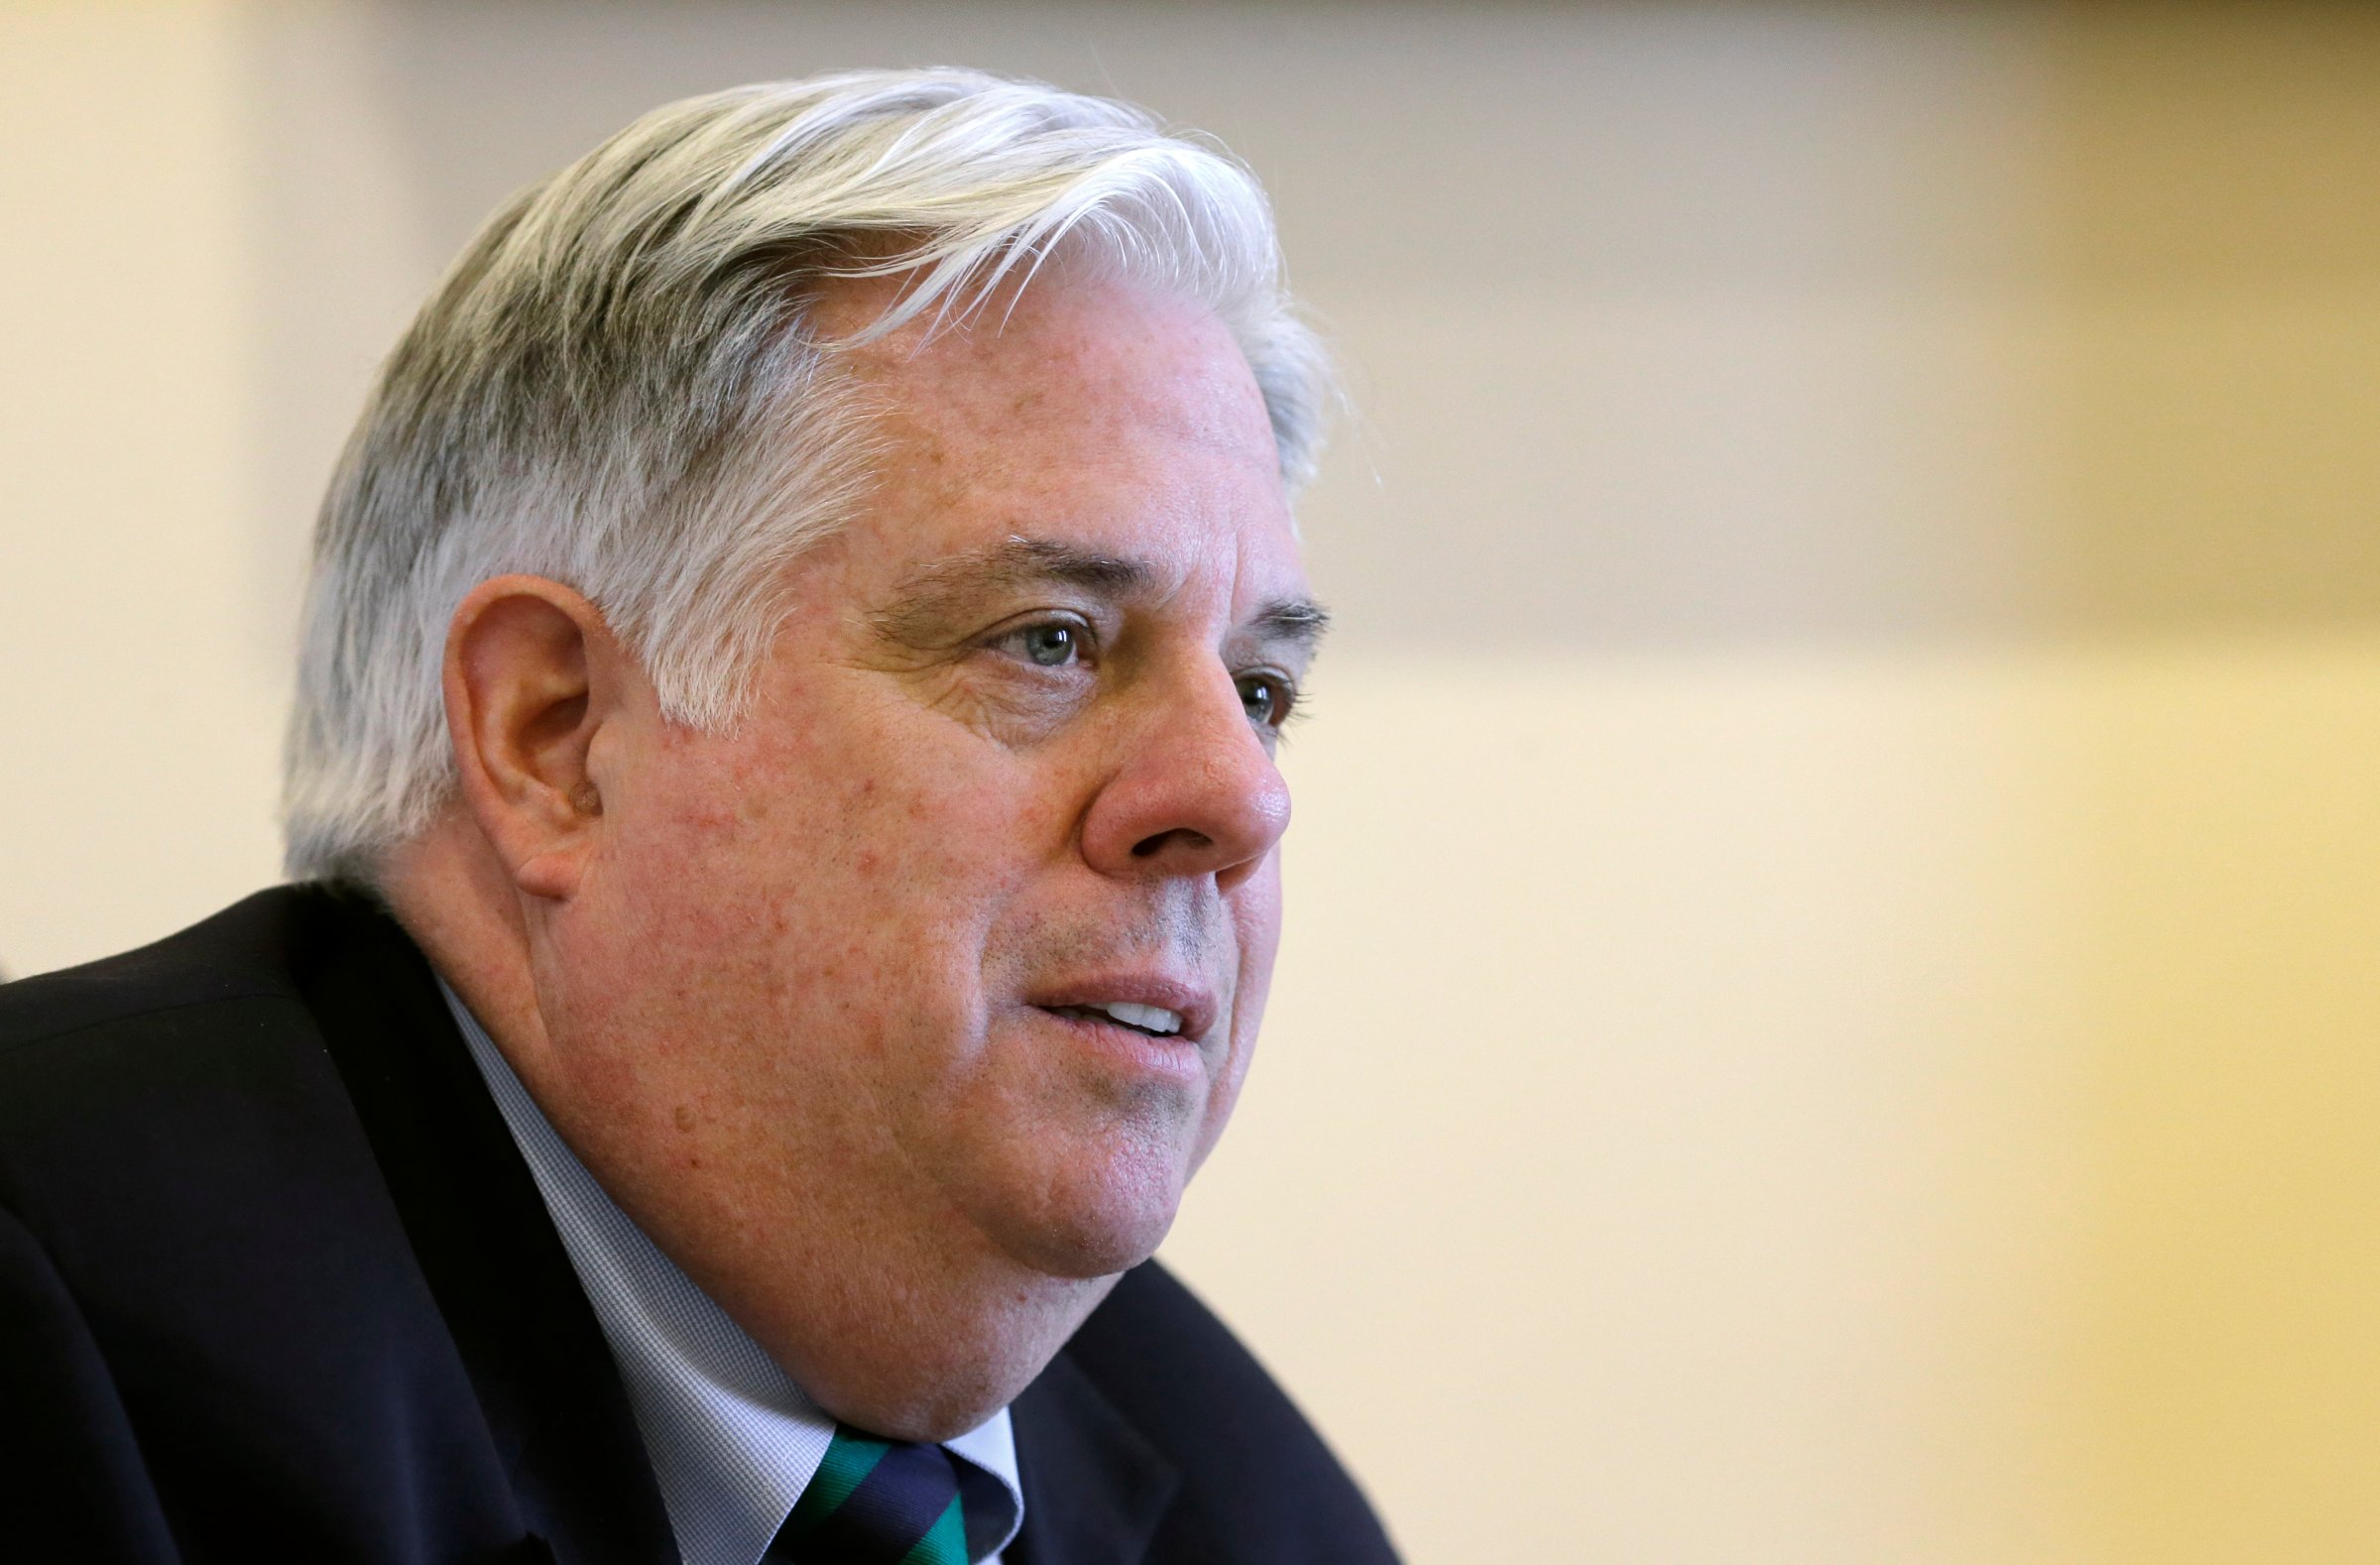 Maryland Gov. Larry Hogan at an interview in Annapolis, Md on April 6, 2015.